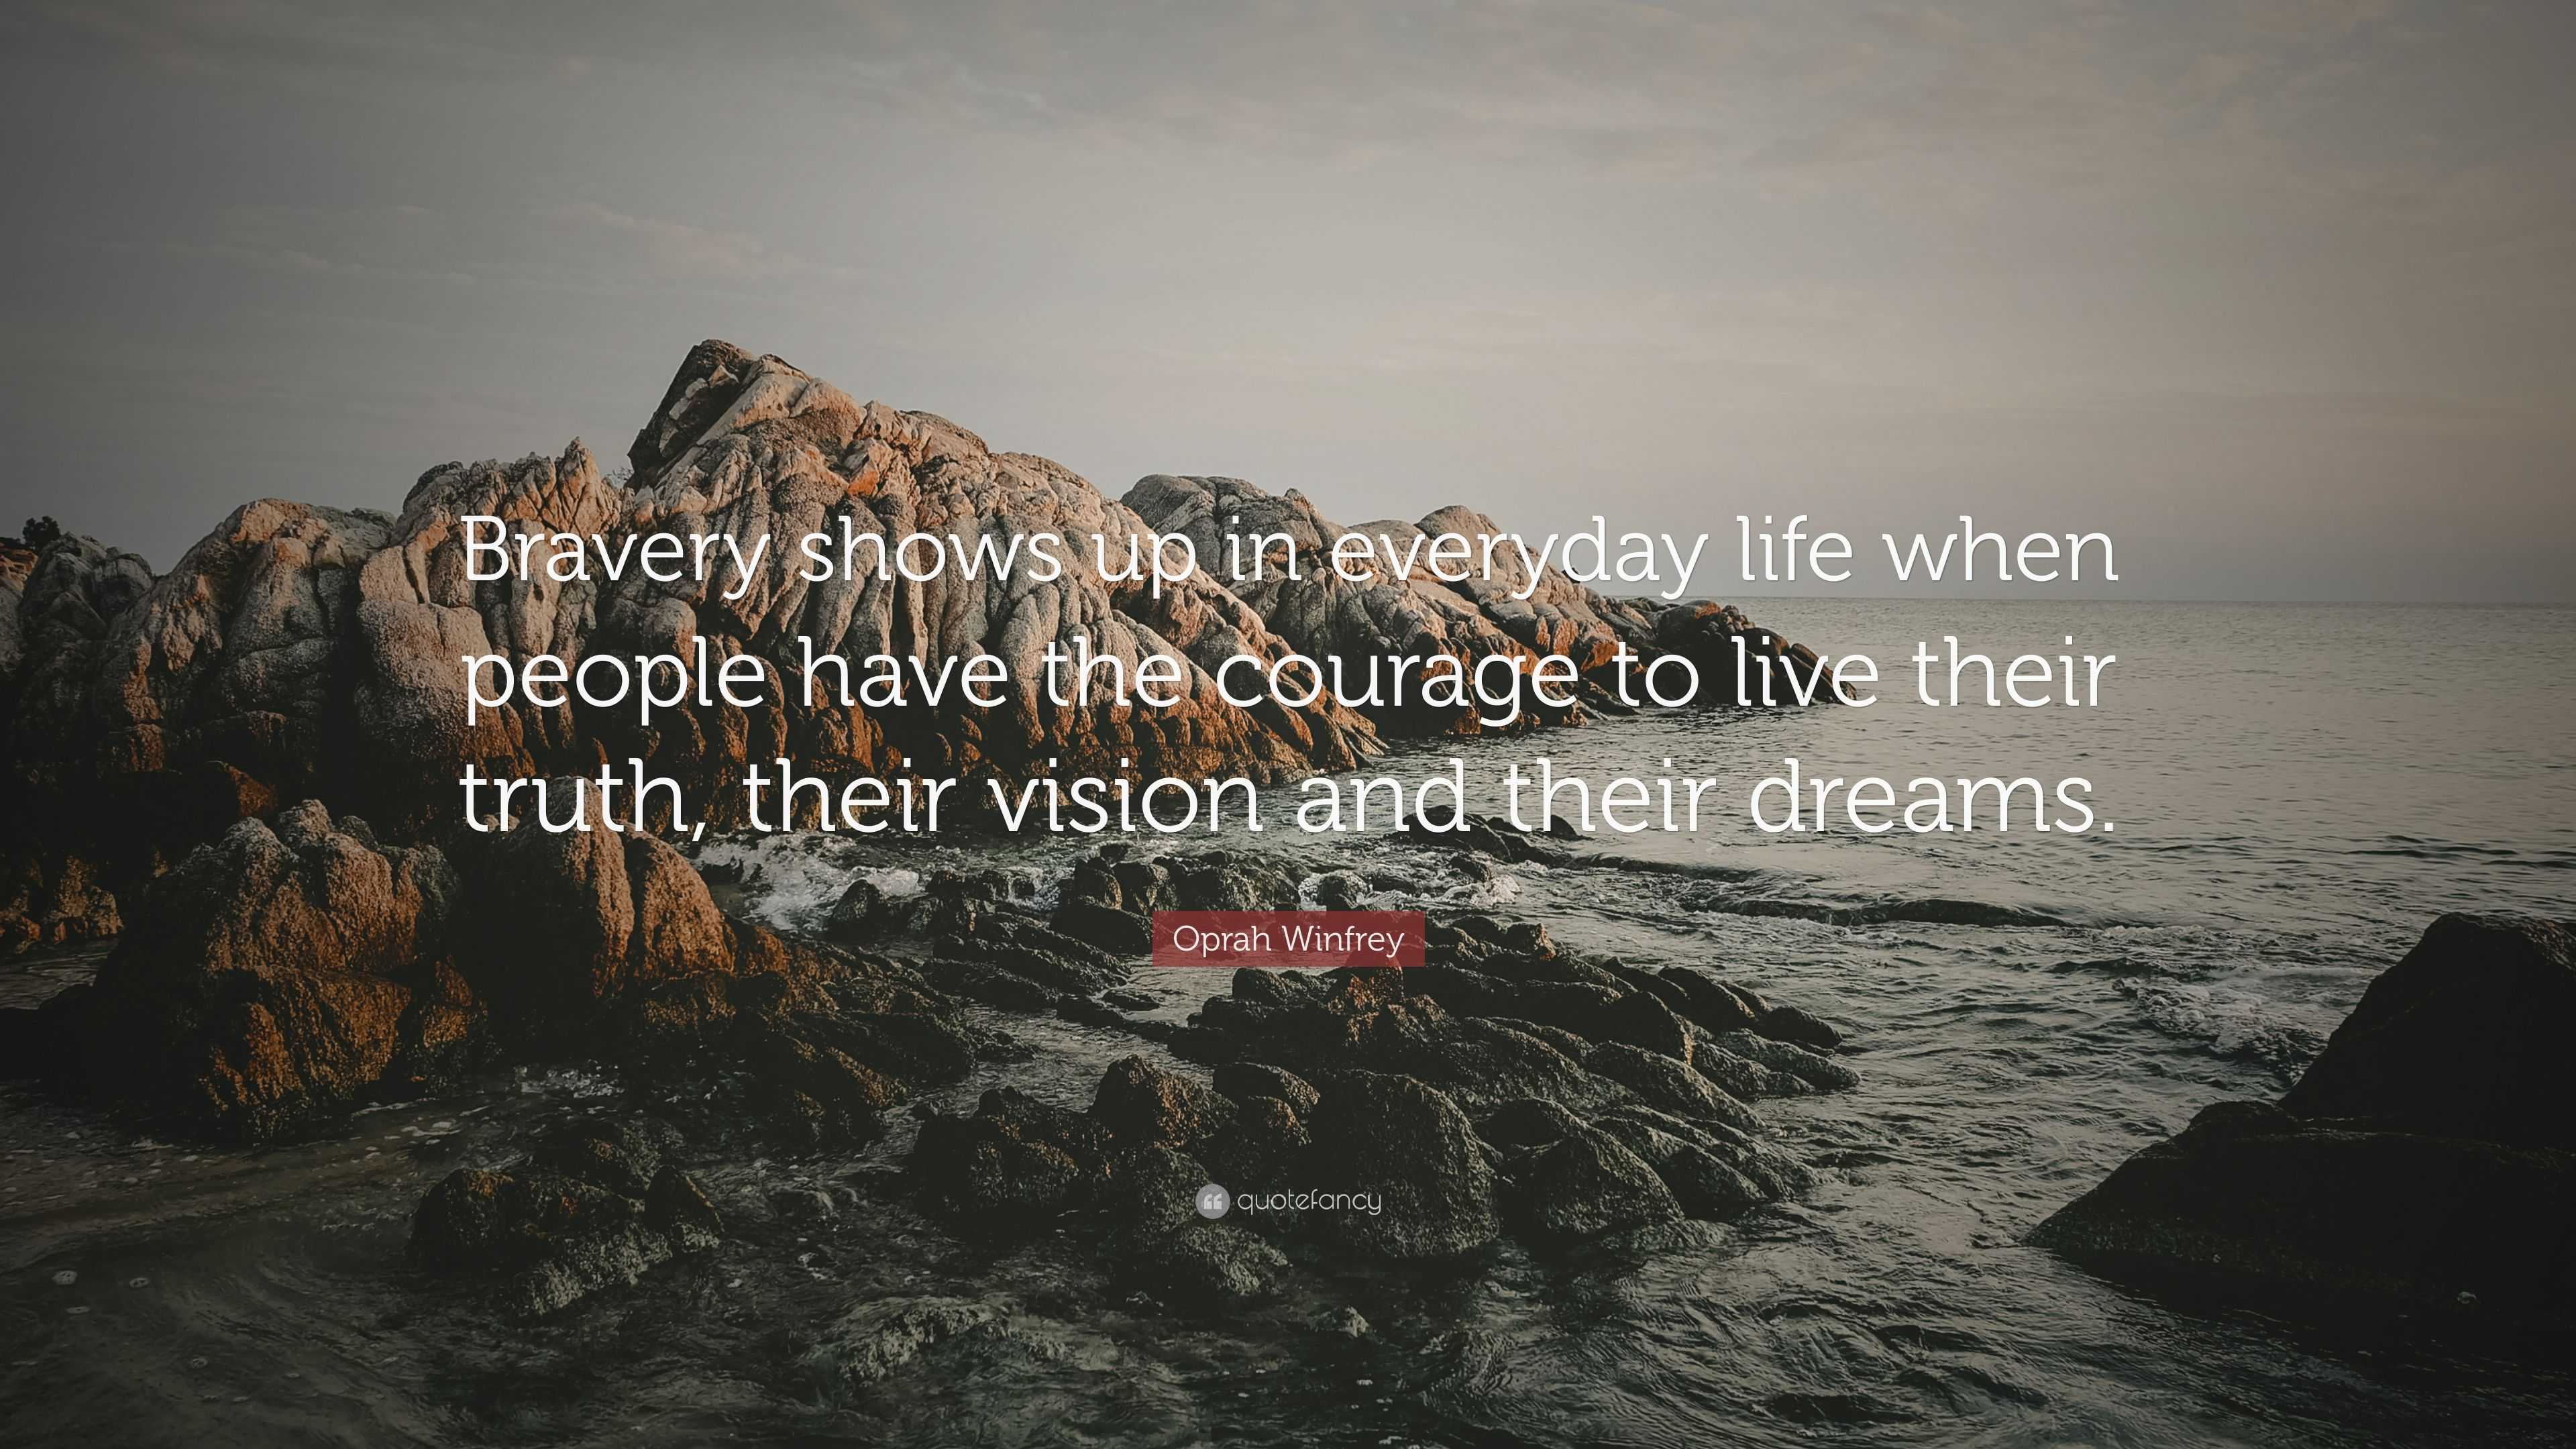 Oprah Winfrey Quote: “Bravery shows up in everyday life when